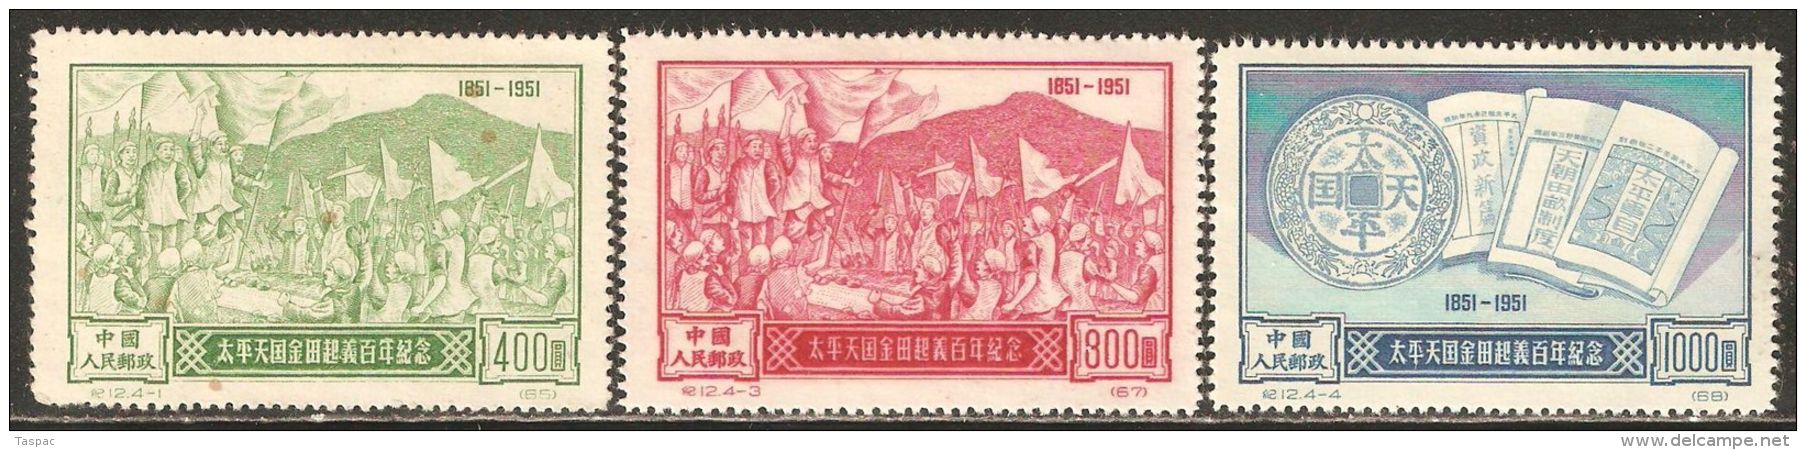 China P.R. 1951 Mi# 129-130, 132 II (*) Mint No Gum, Hinged - Reprints - Short Set - Cent. Of Taiping Peasant Rebell - Reimpresiones Oficiales